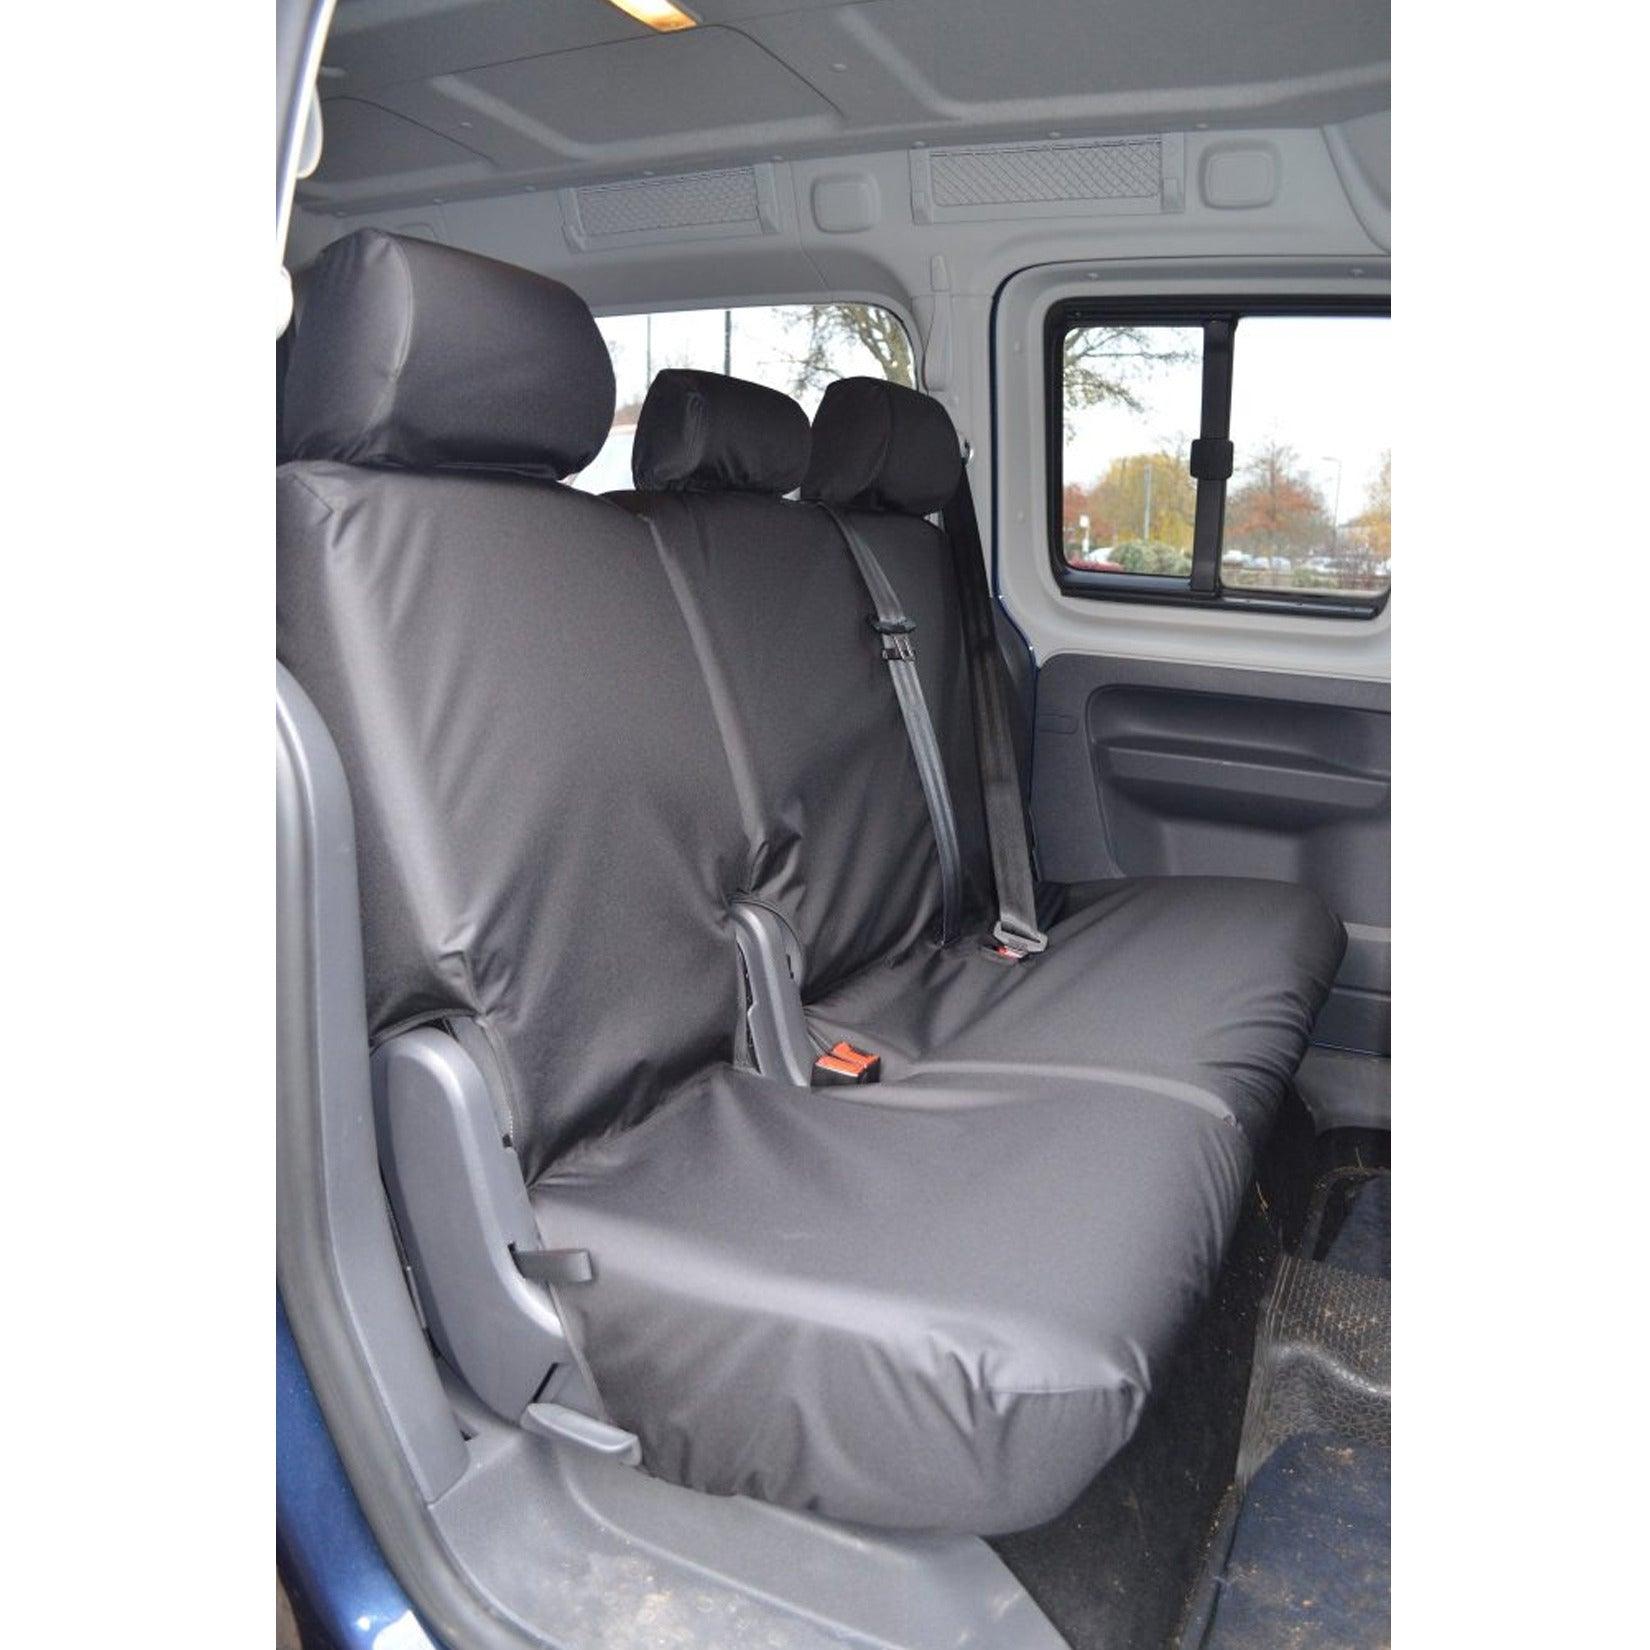 VW CADDY LIFE 2004-2021 2ND ROW SEAT COVERS - BLACK - Storm Xccessories2